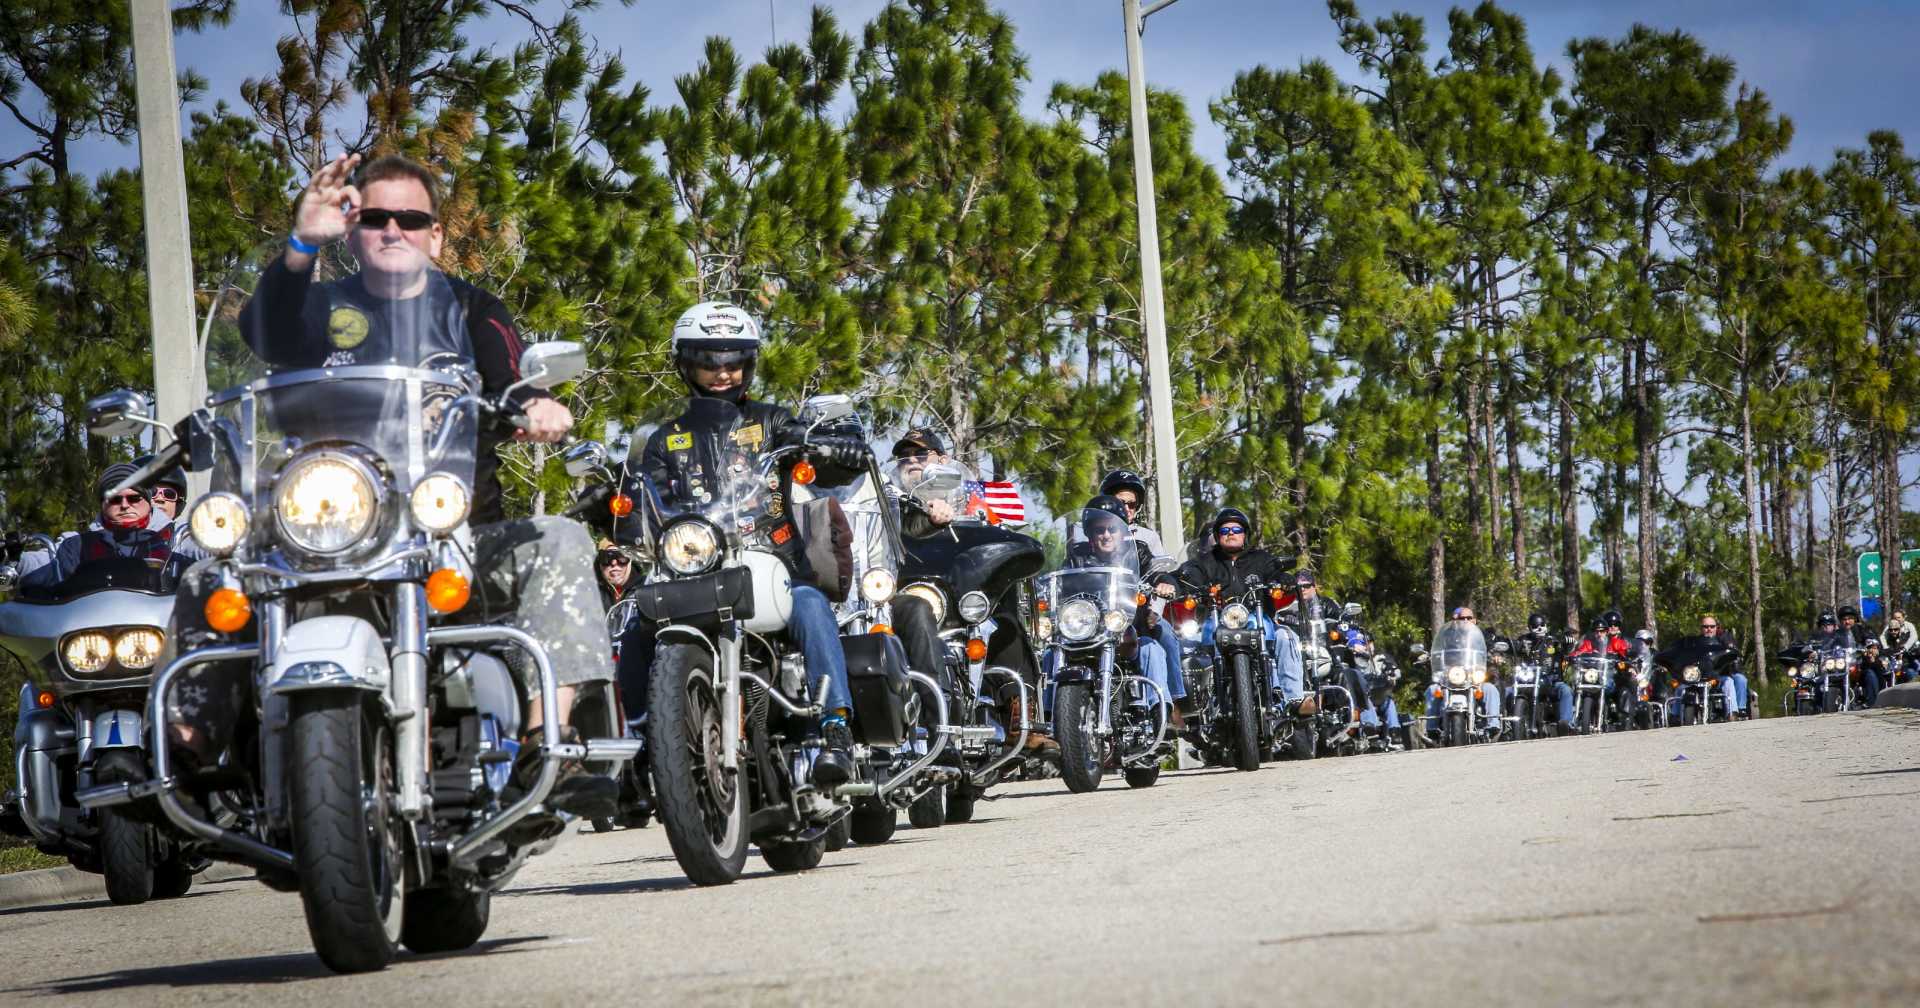 Largest parade of Harley Davidson motorcycles: world record set by Texas parade